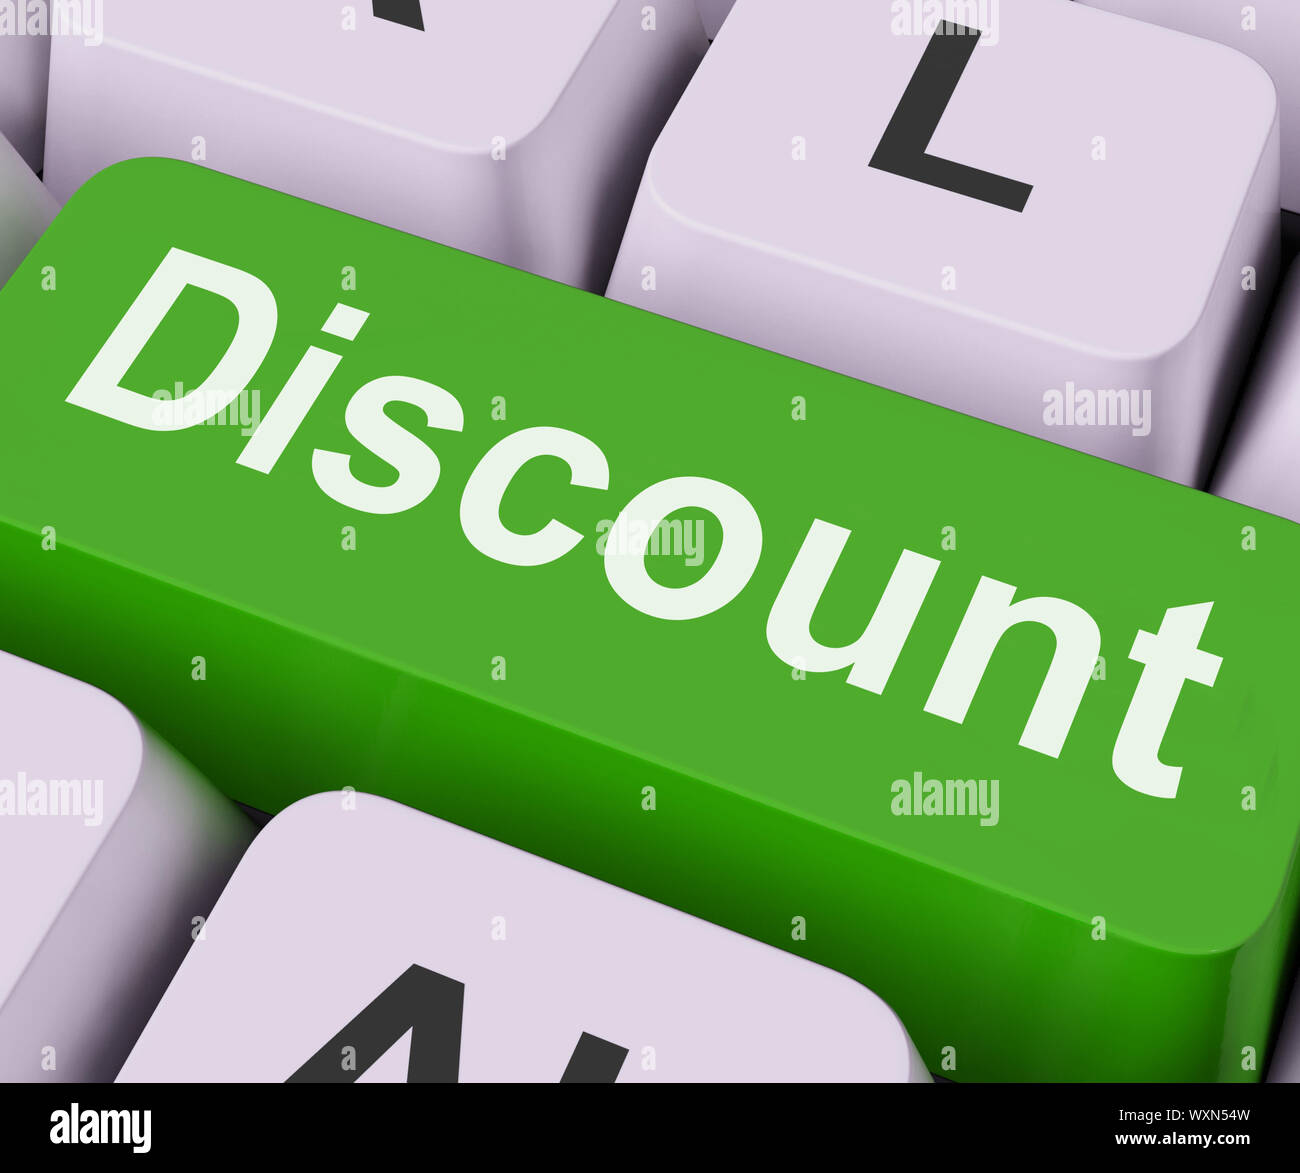 Discount Key On Keyboard Meaning Rebate Cut Price Or Reduce Stock Photo -  Alamy